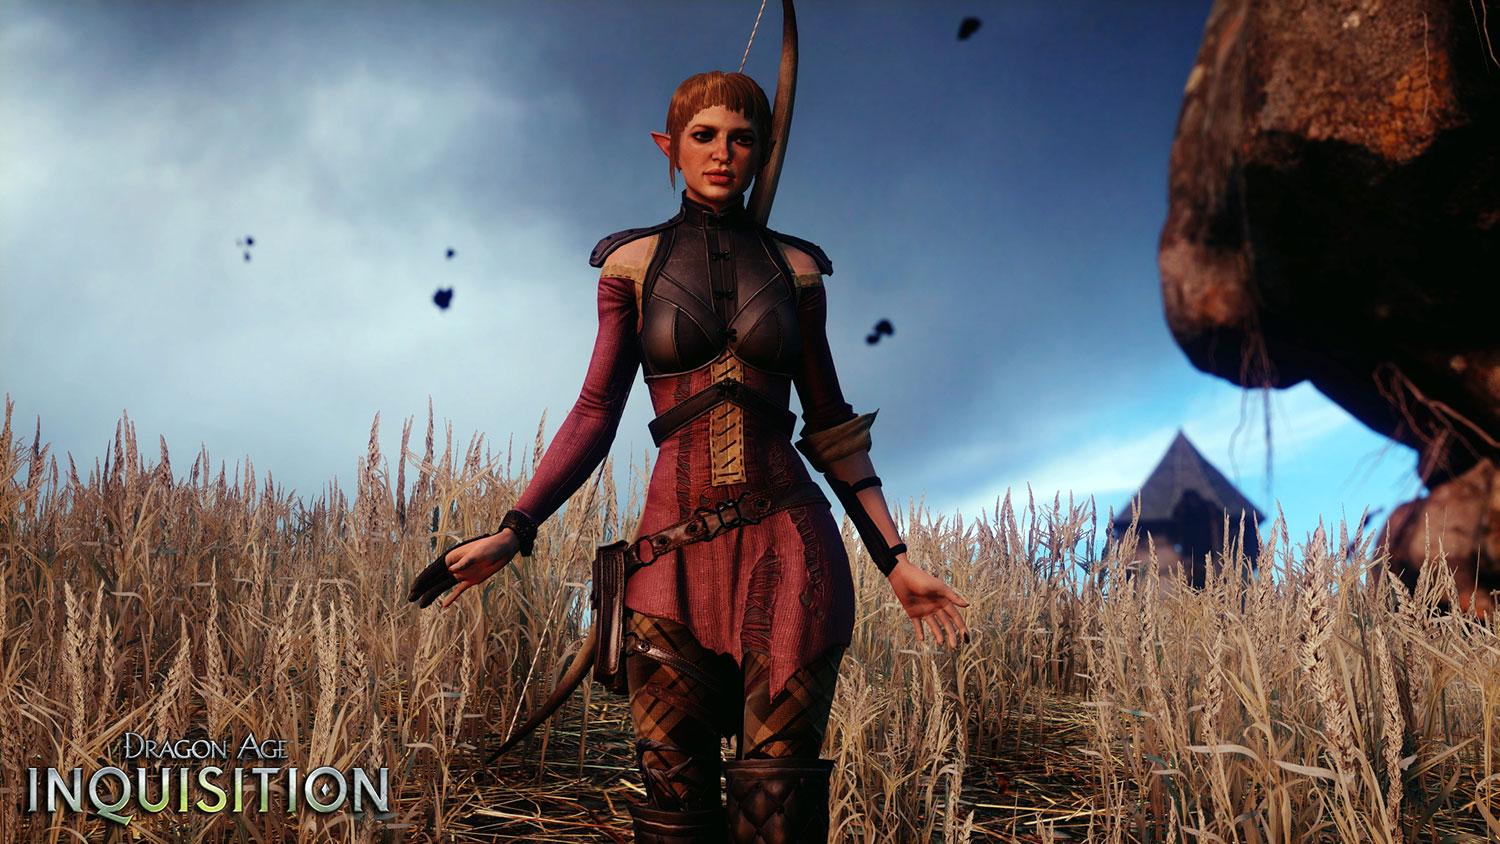 Dragon Age: Inquisition – How To Get Started Playing Your First Game